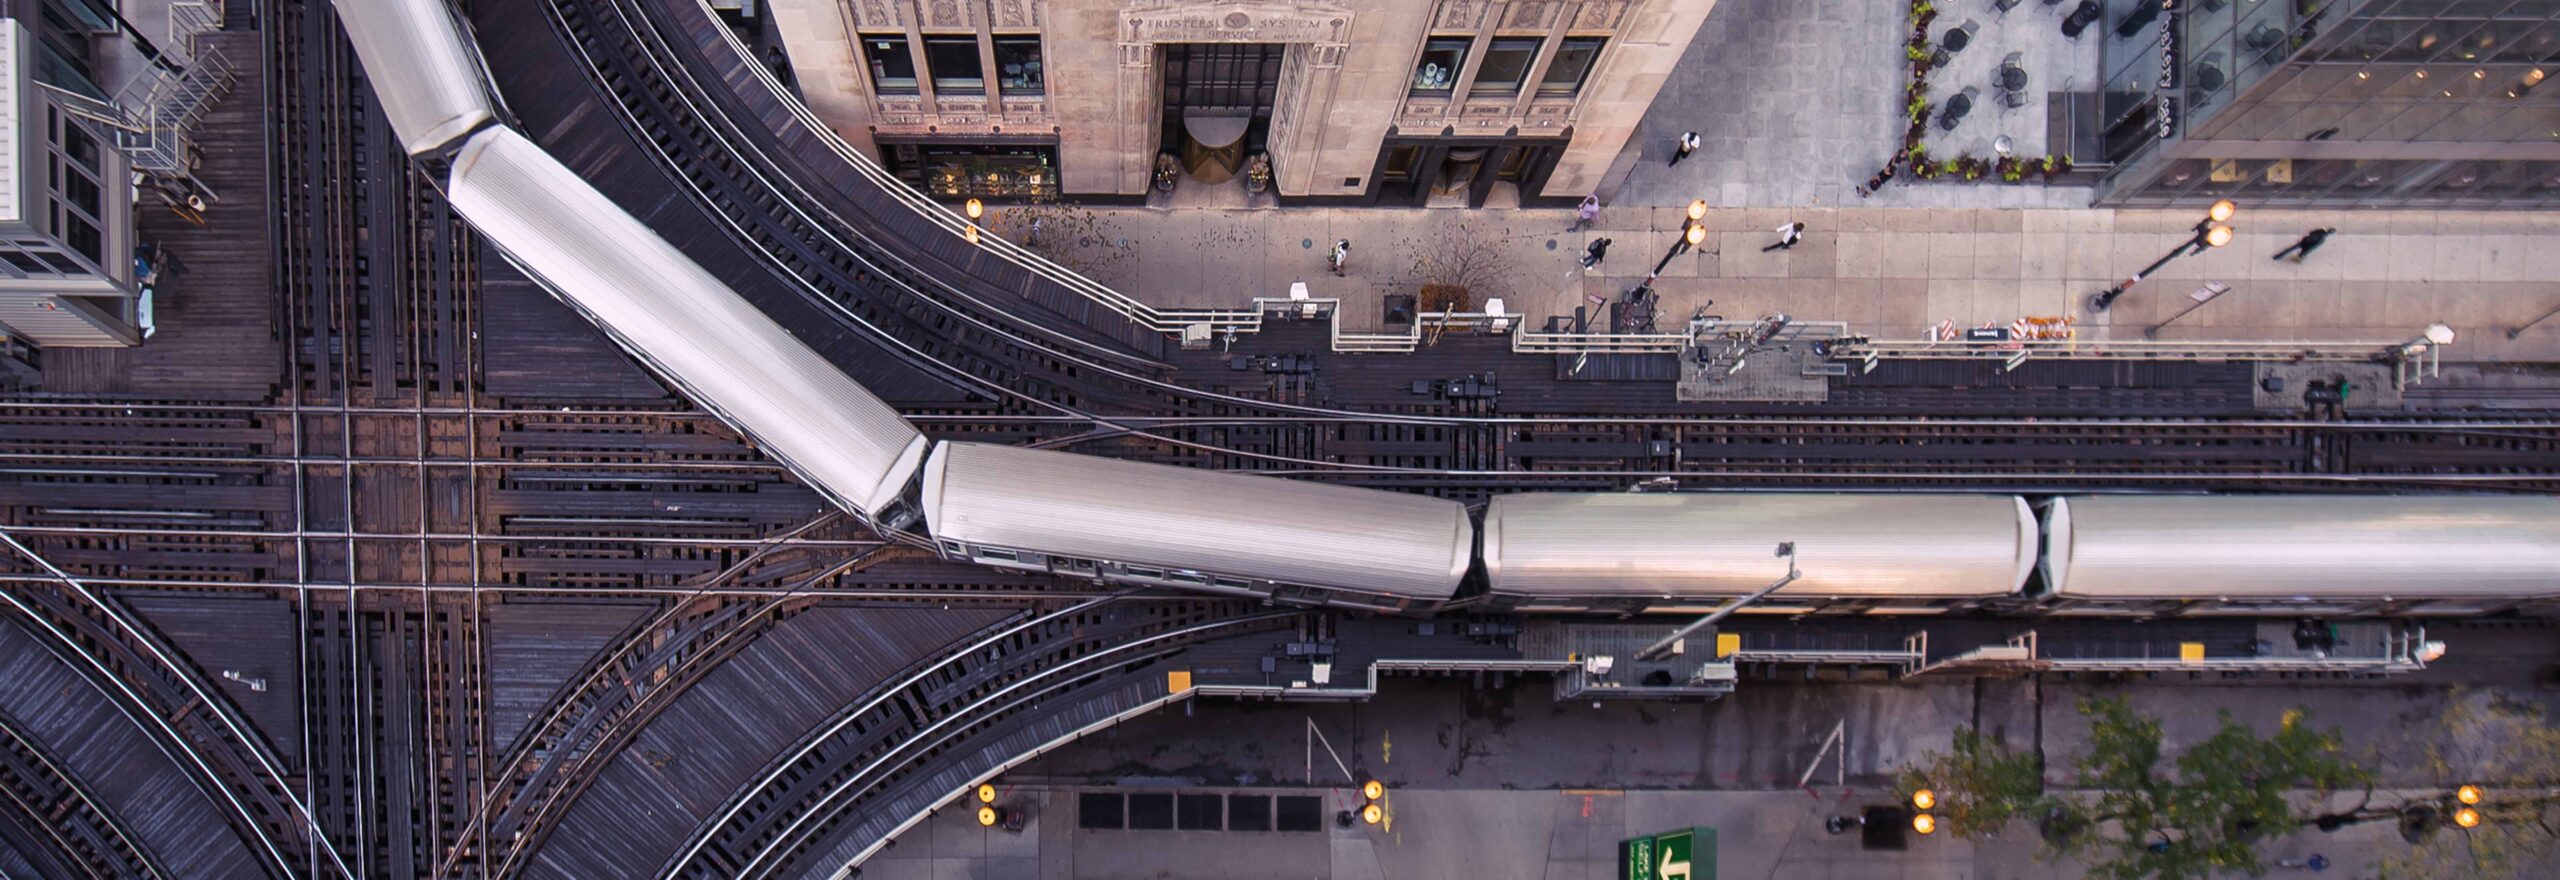 Aerial view of a Chicago L train turning around a building